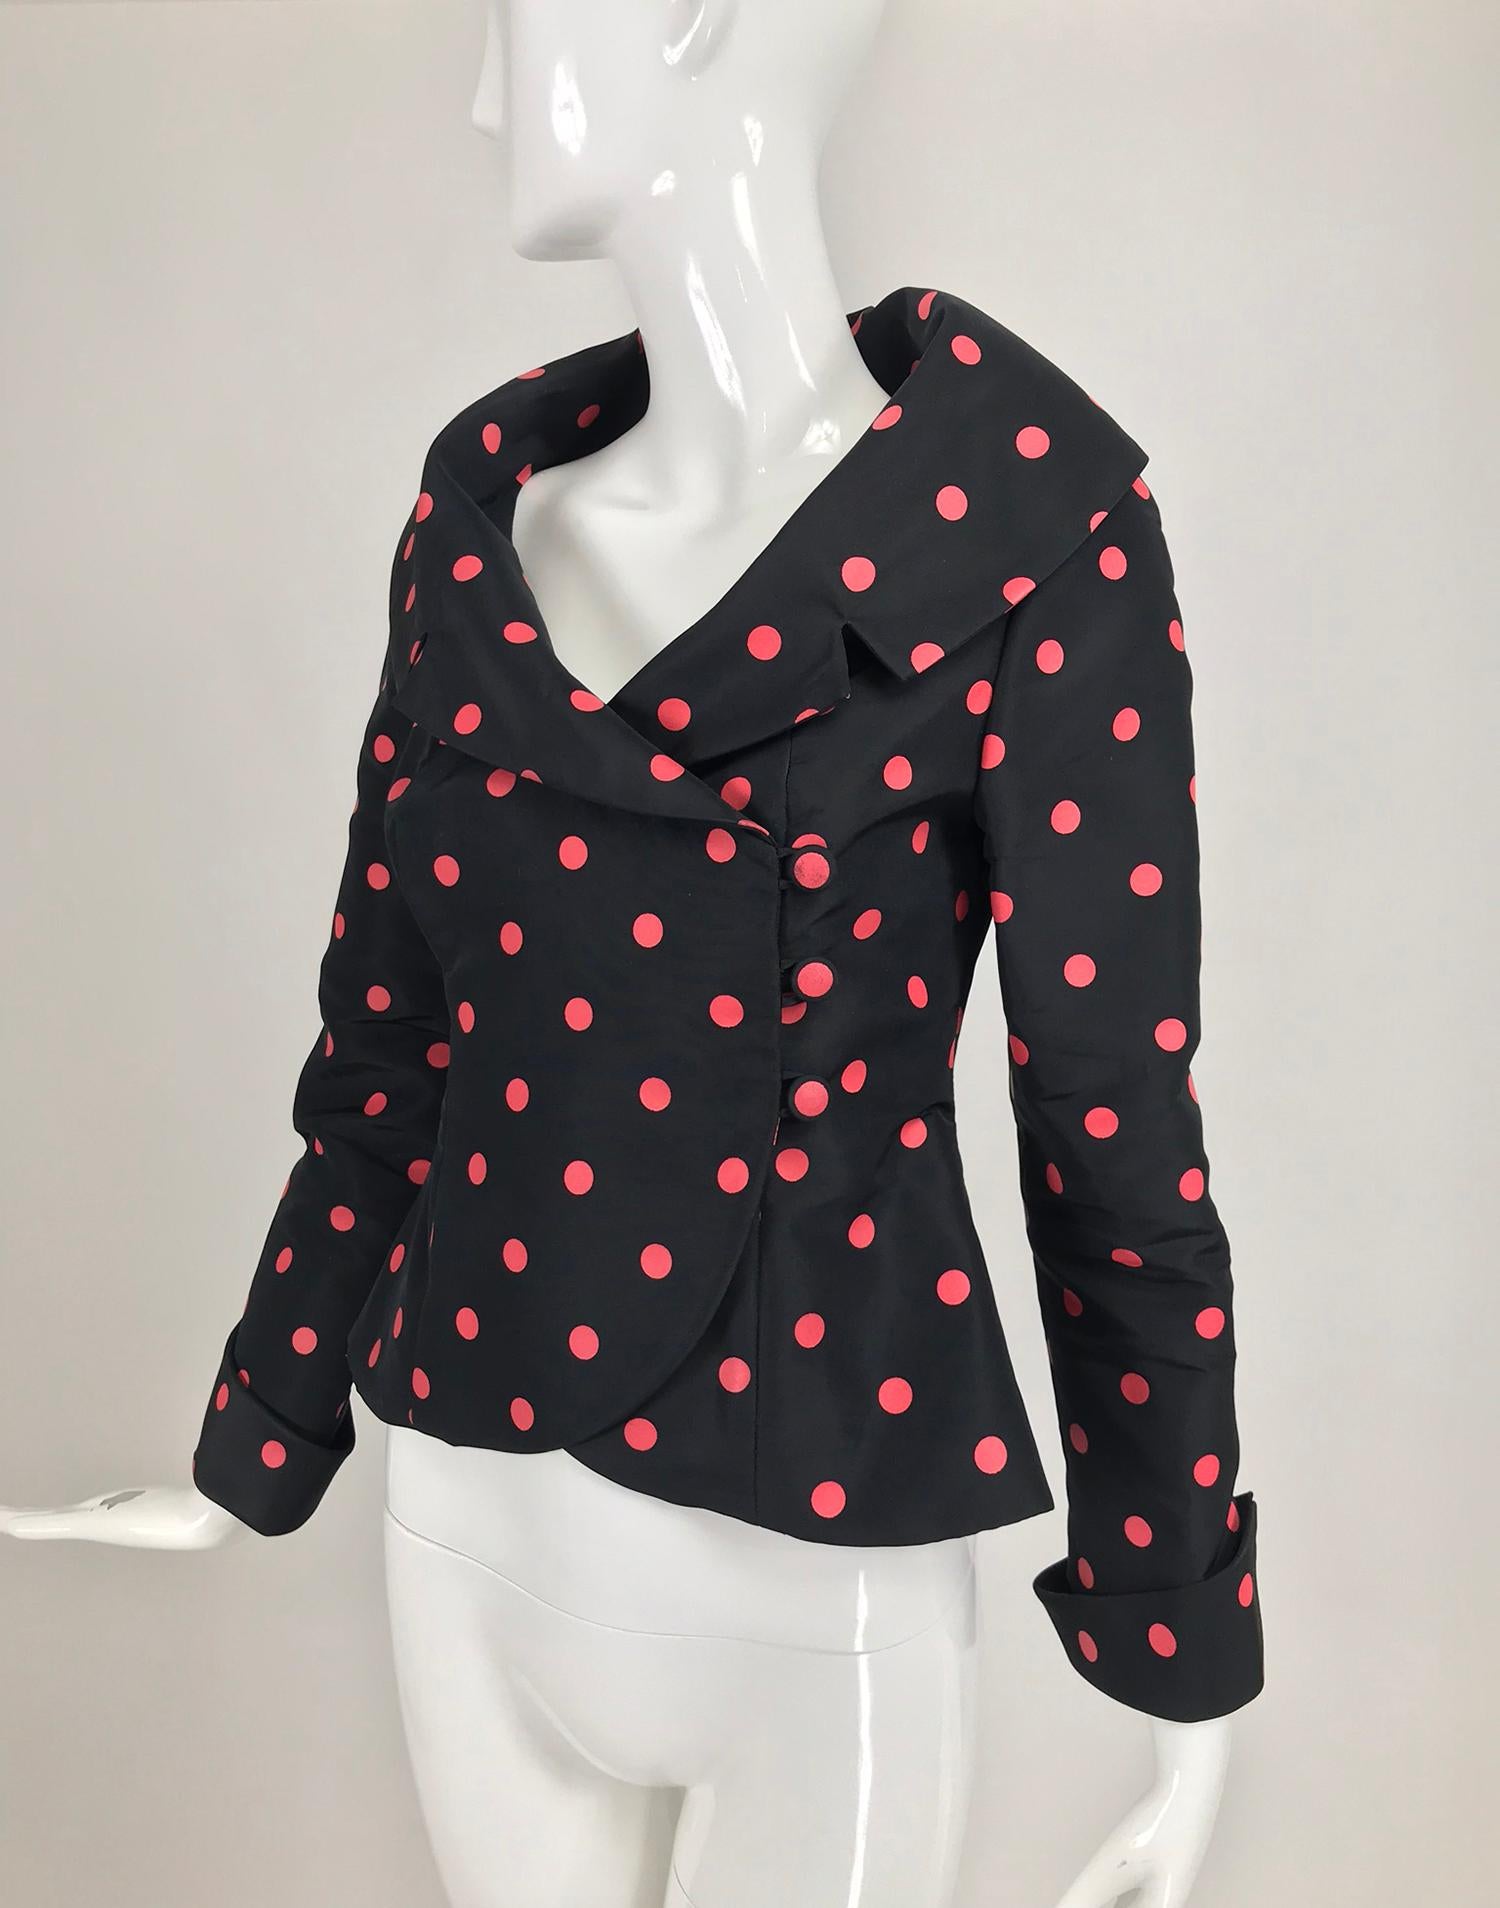 Tosca Couture Black and Red Dot Silk Taffeta Jacket  2